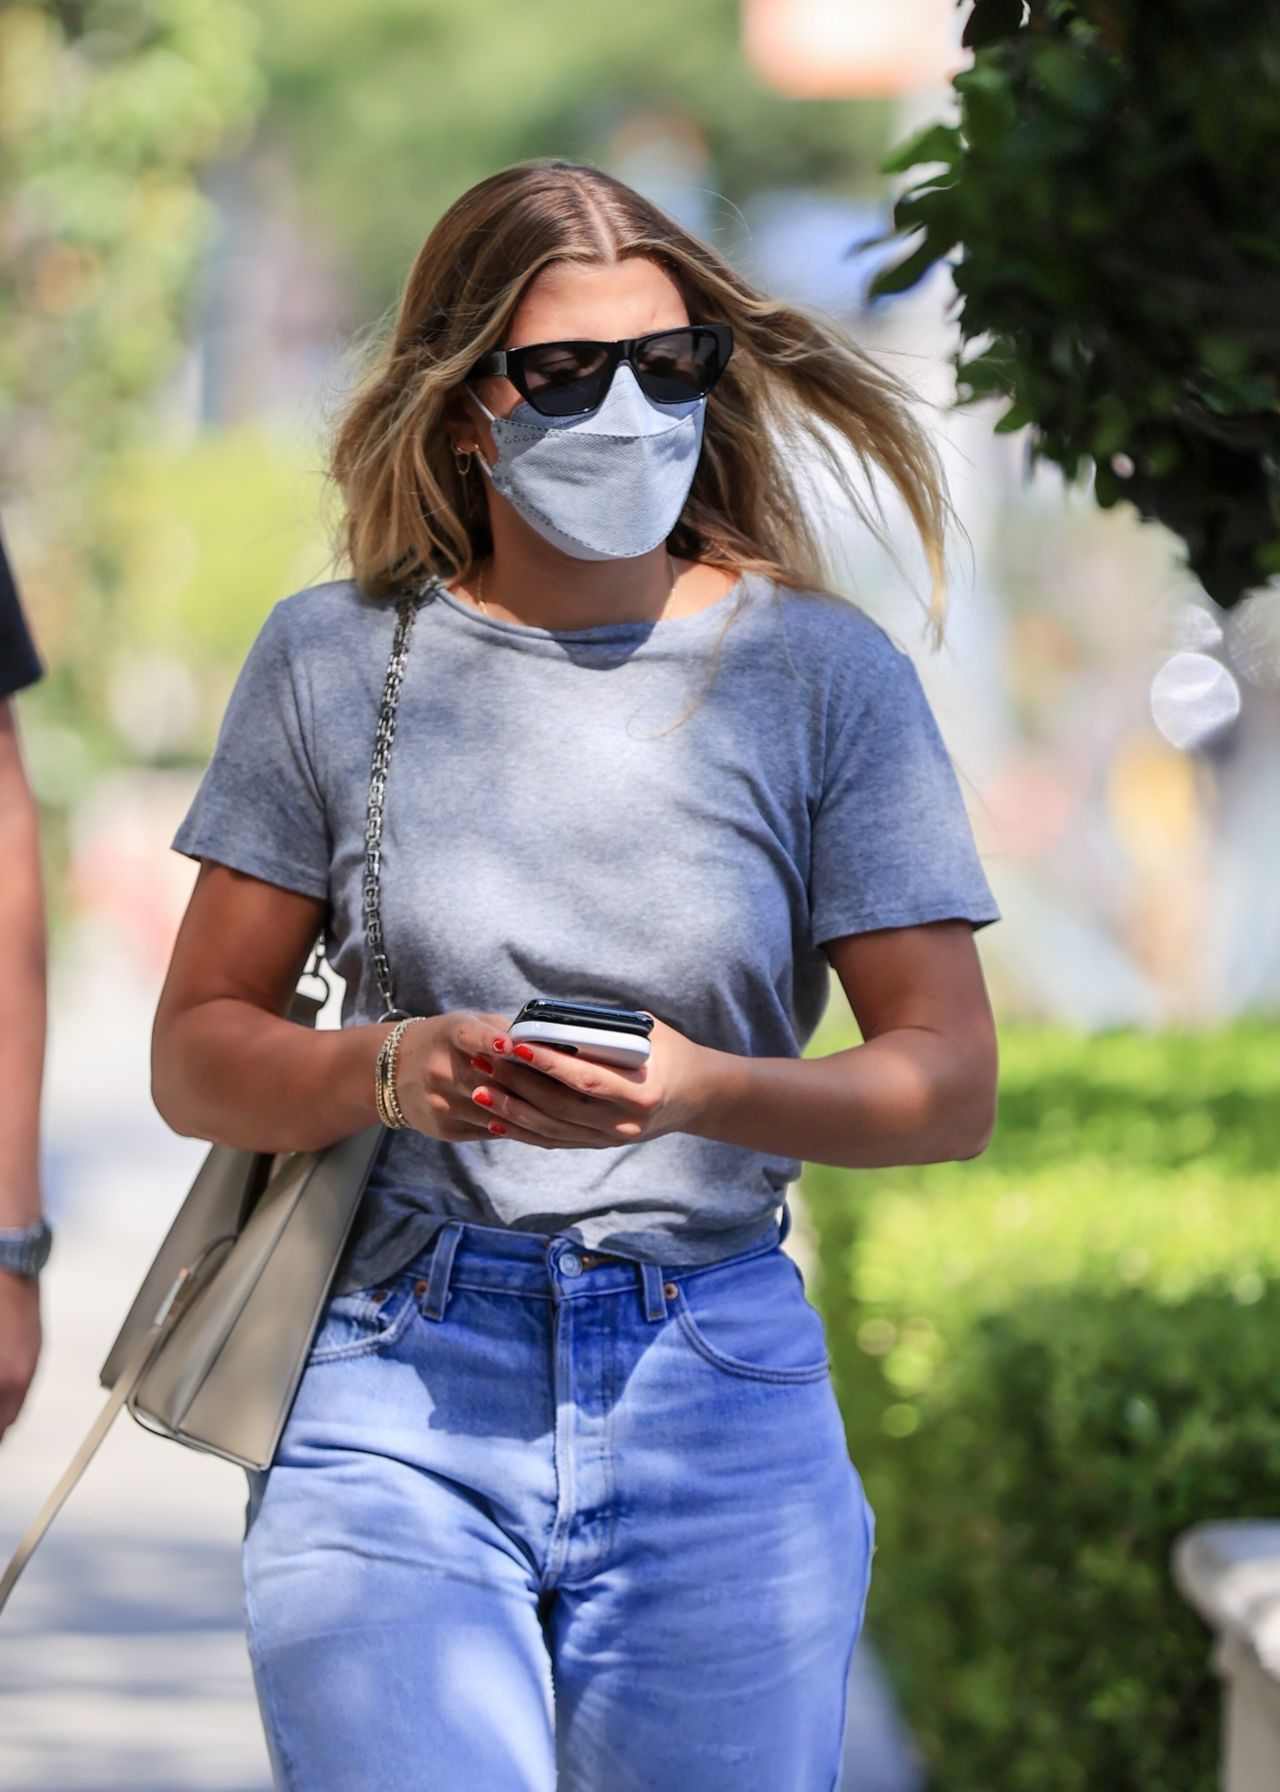 Sofia Richie West Hollywood April 10, 2018 – Star Style